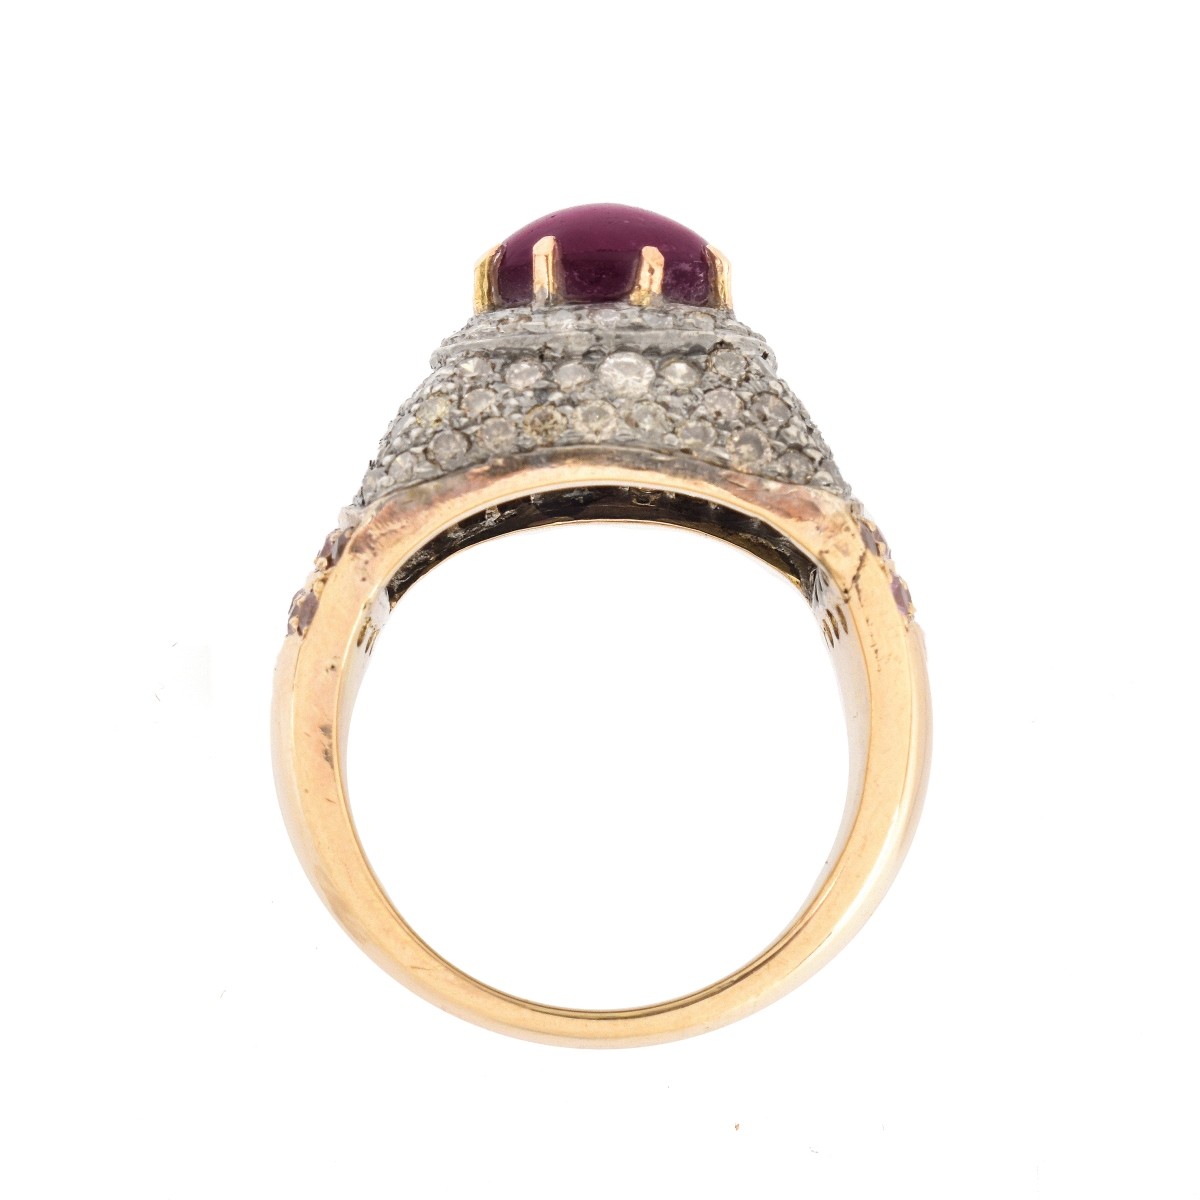 Vintage Star Ruby, Diamond and 14K Ring